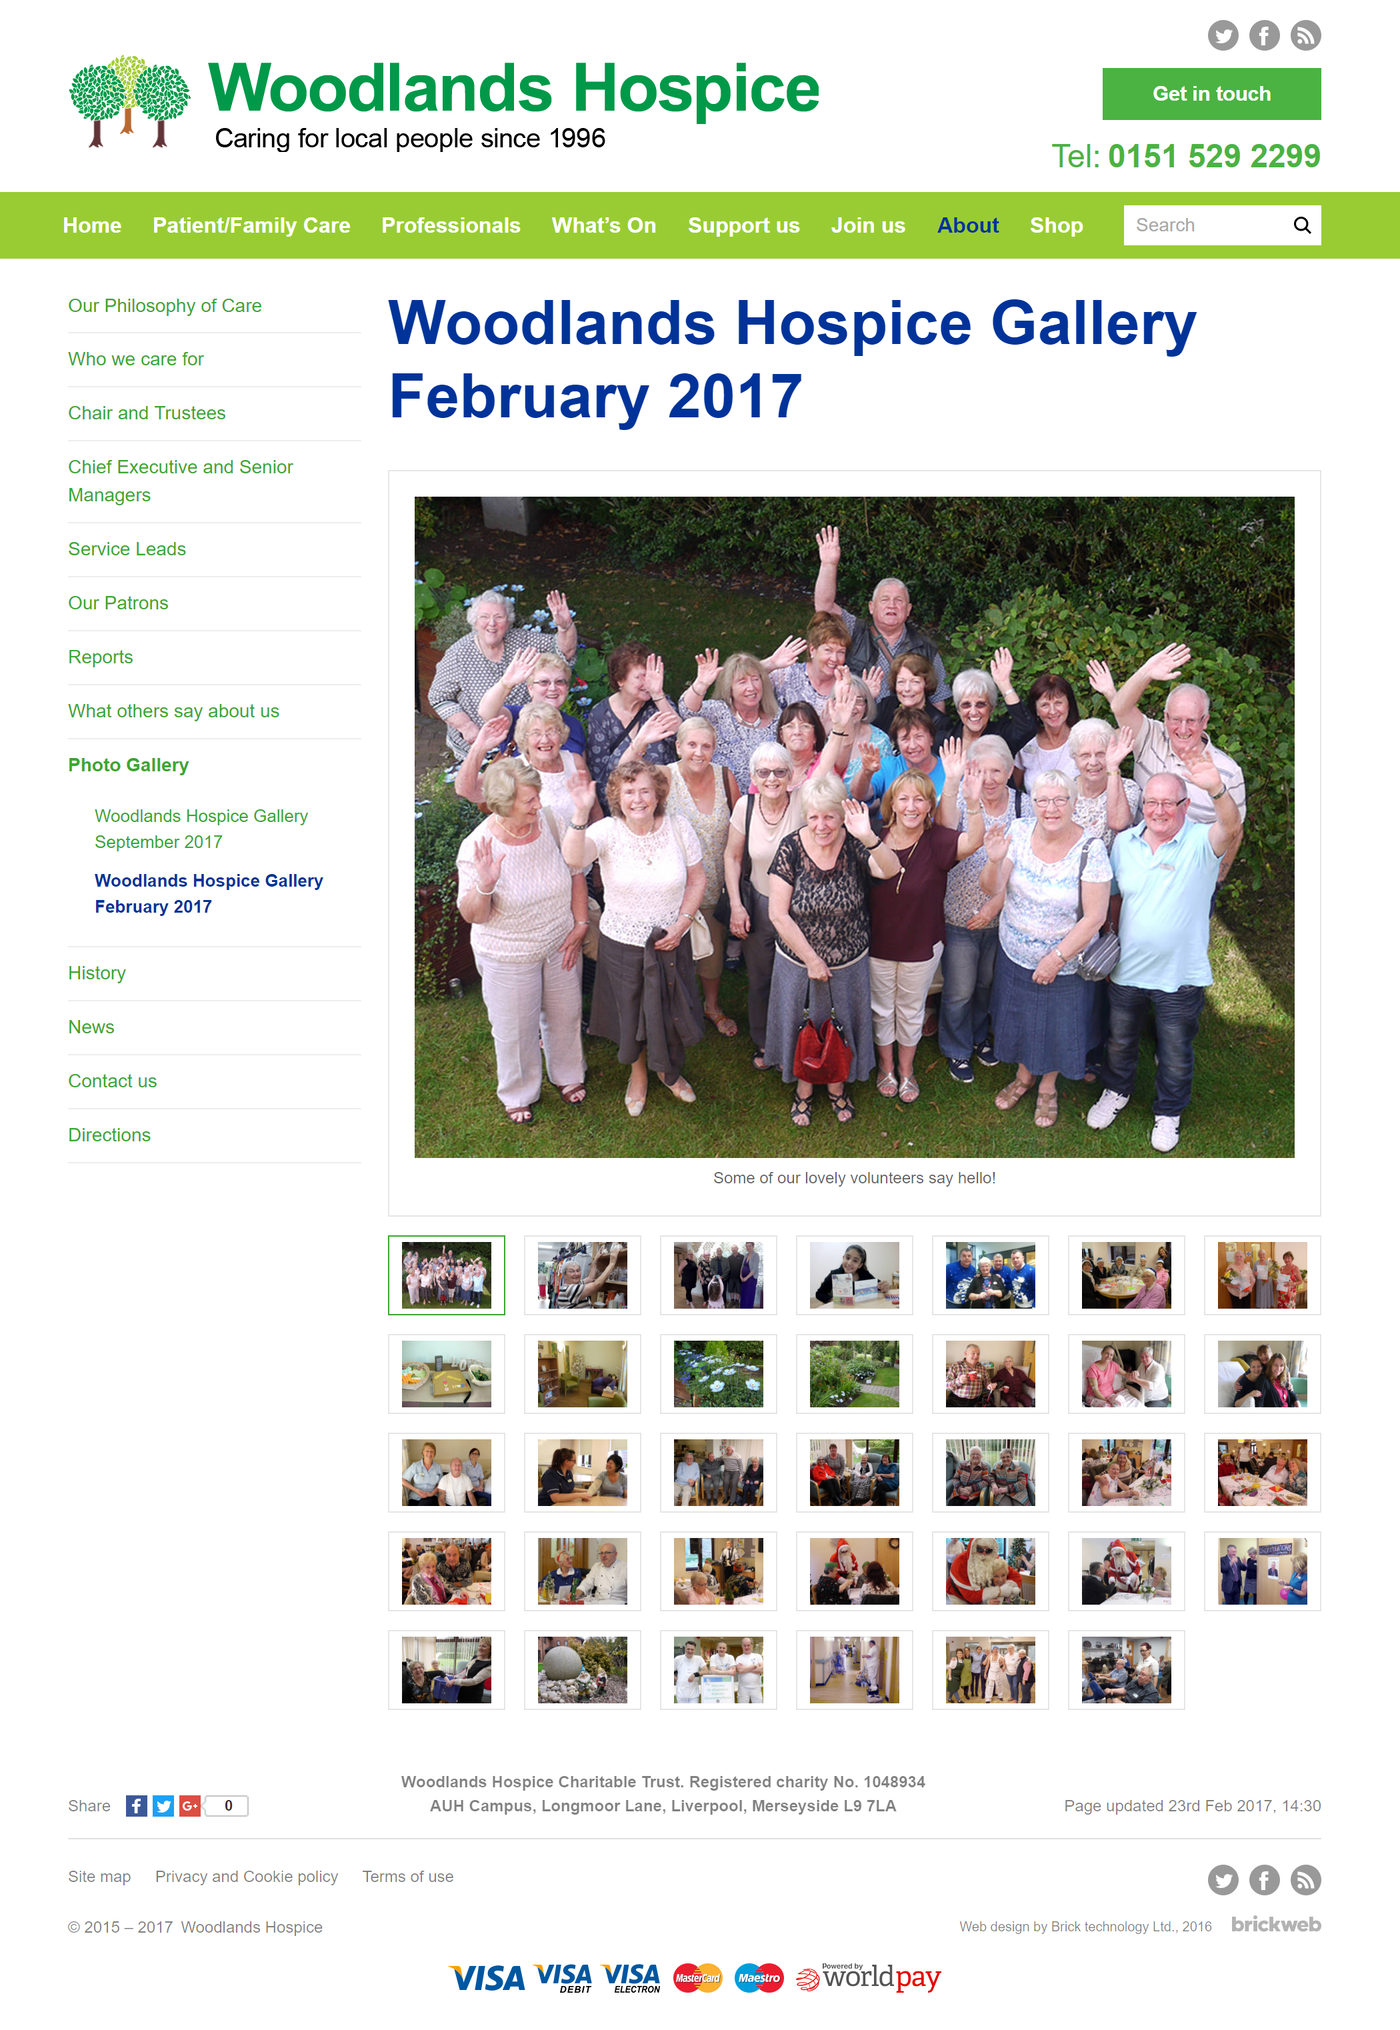 Woodlands Hospice Gallery February 2017